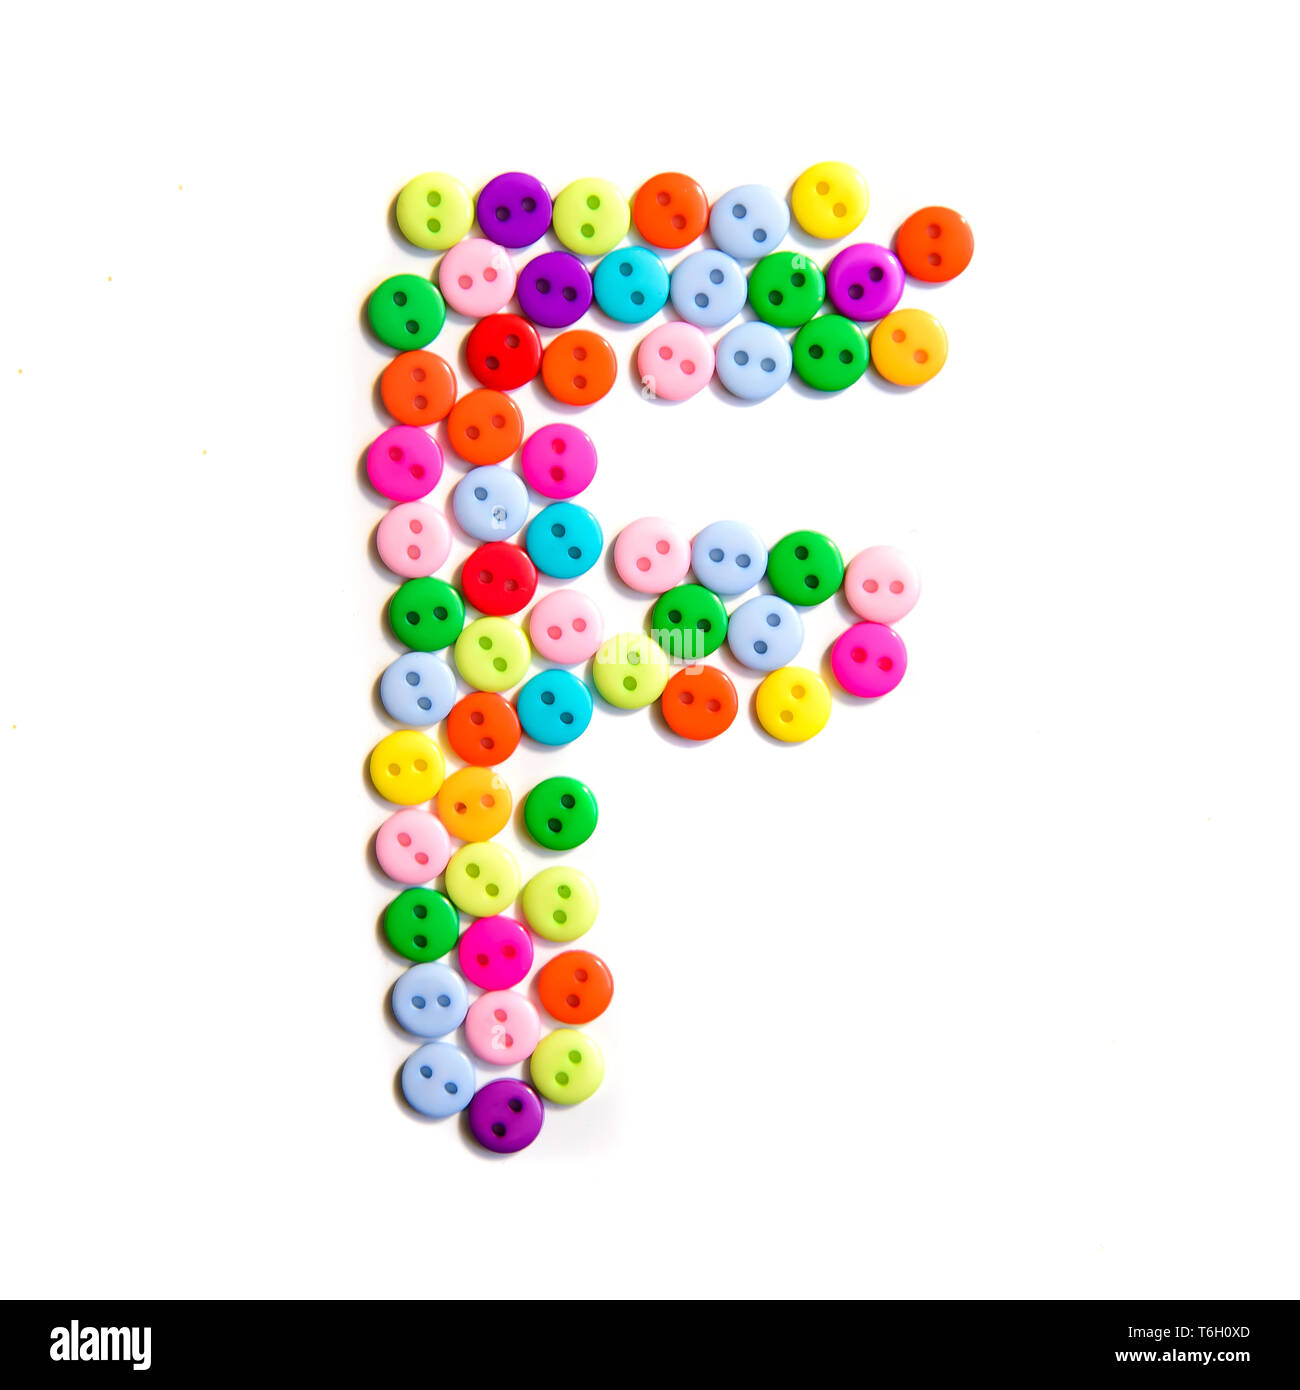 Letter F of the English alphabet from a group of colorful small buttons on a white background Stock Photo